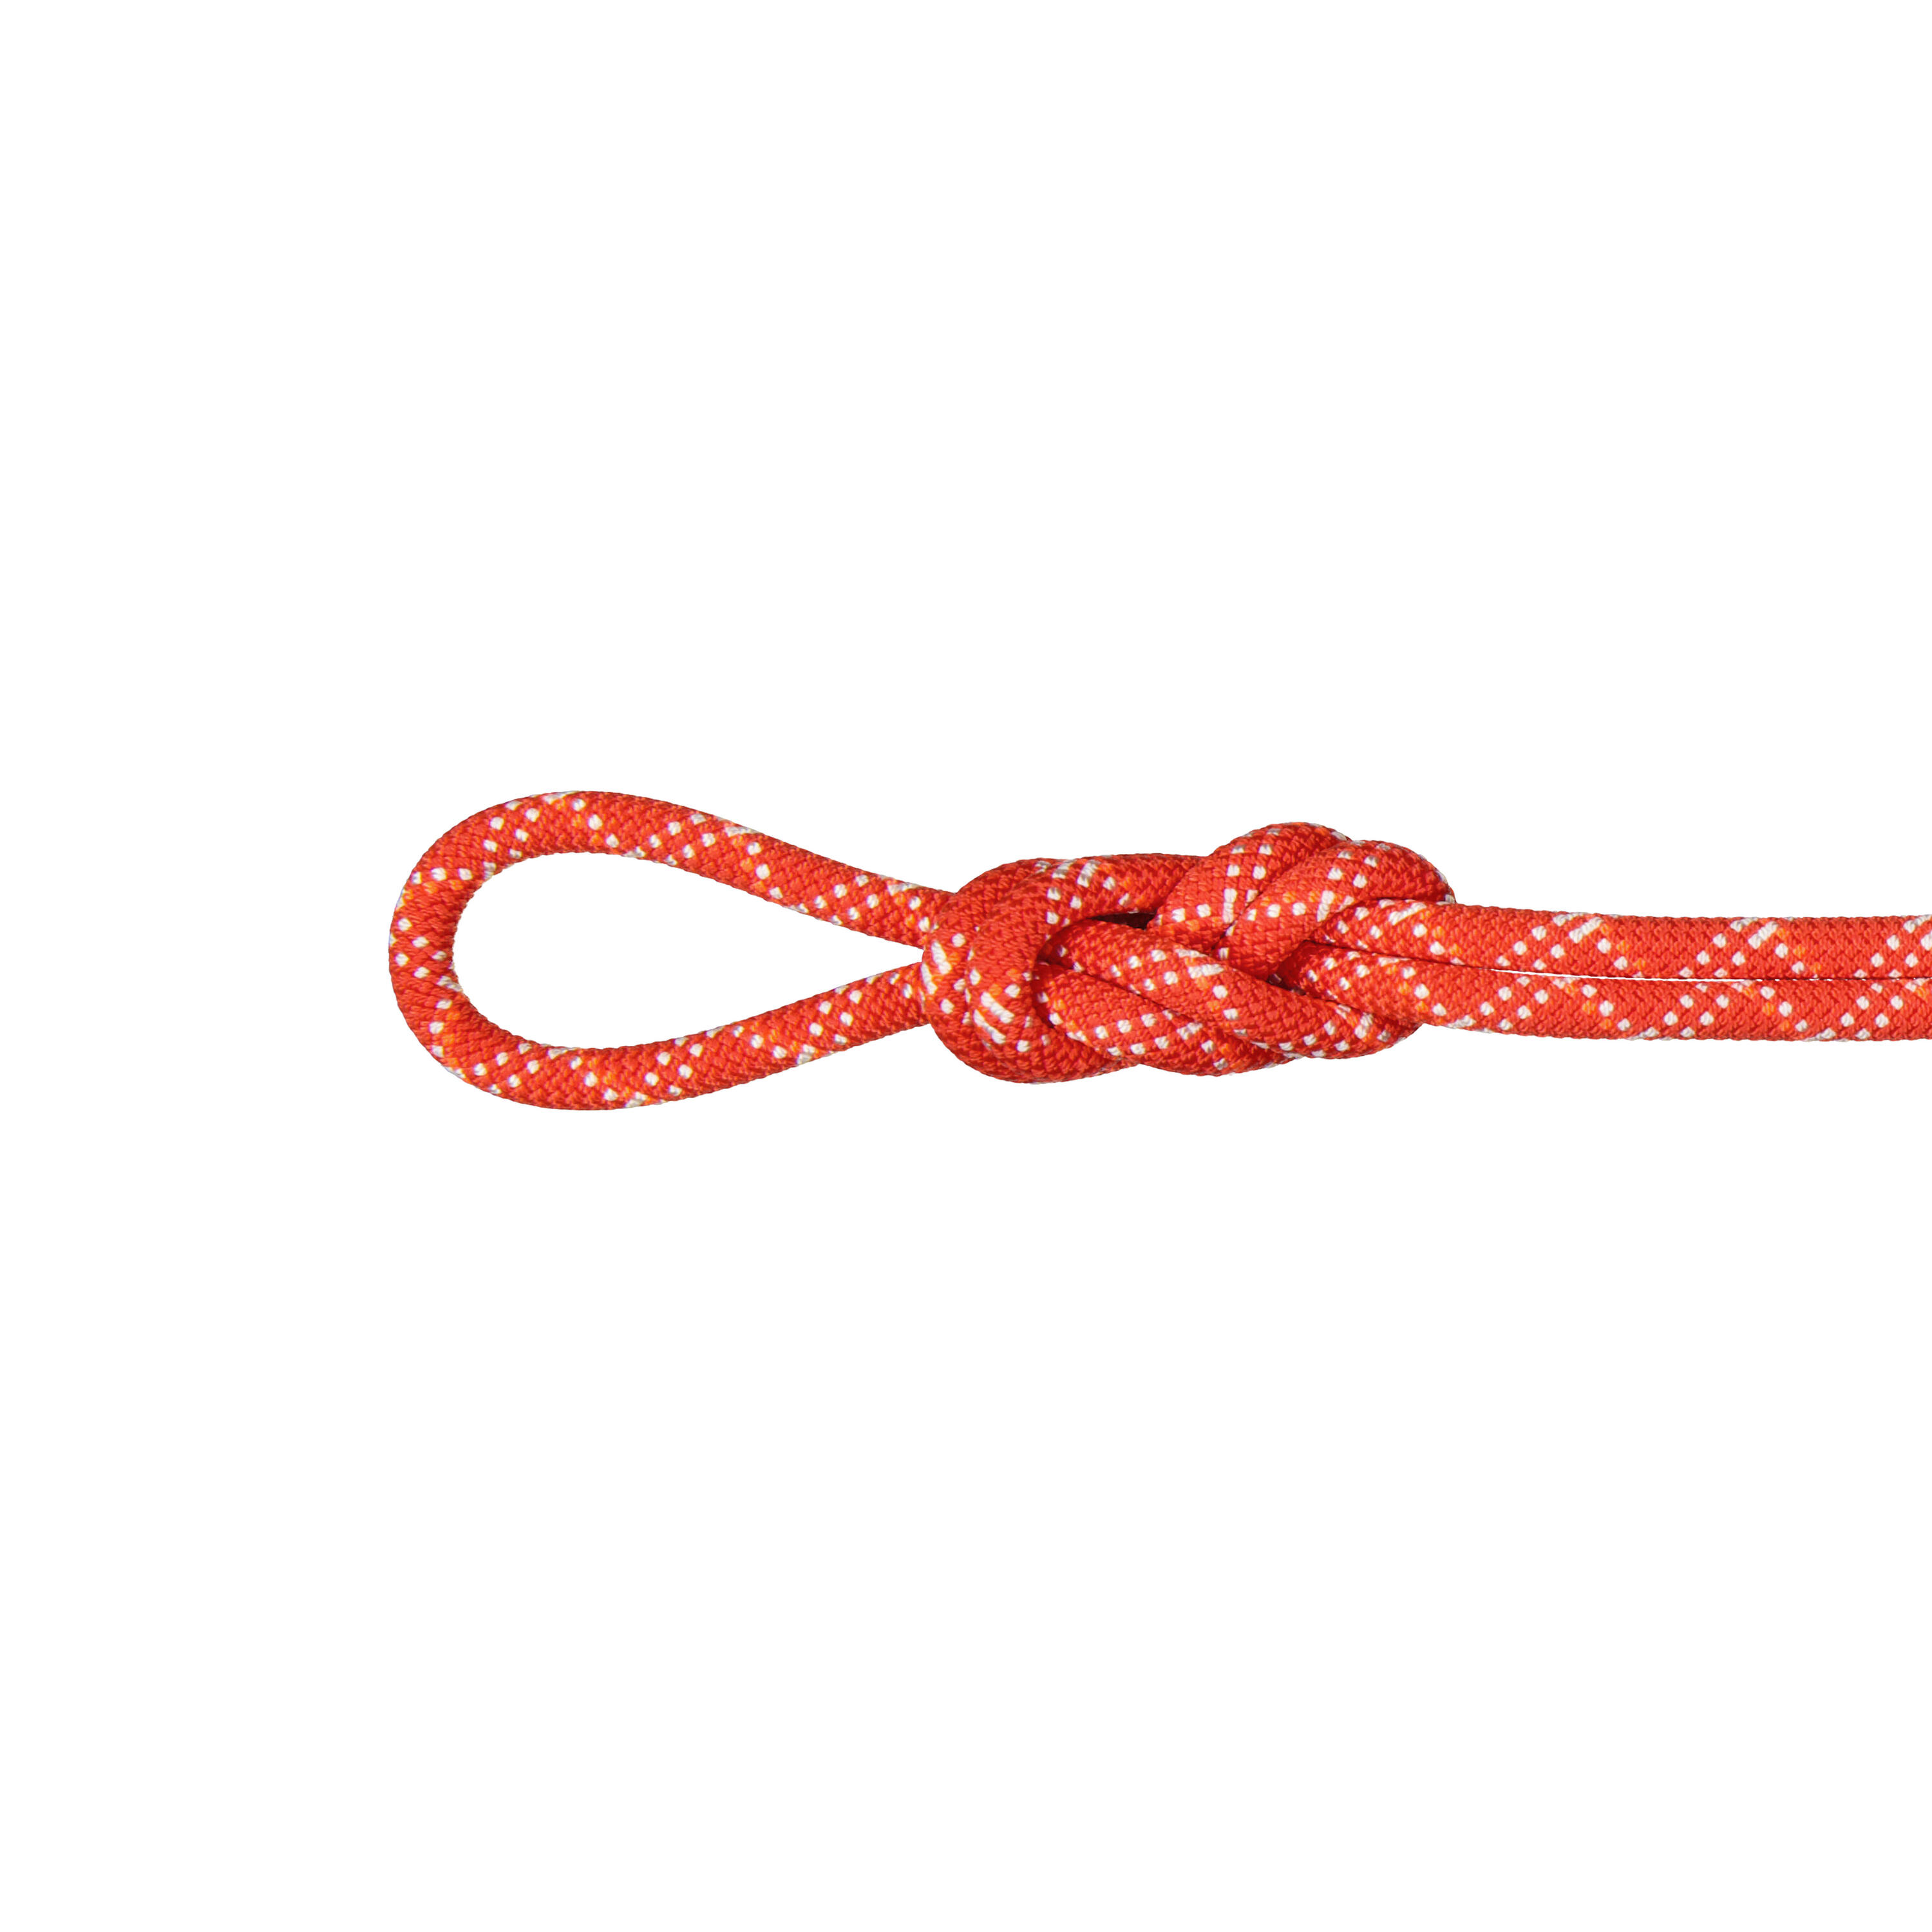 MAMMUT Gym Classic Single Rope 9.5 mm x 50m - Red